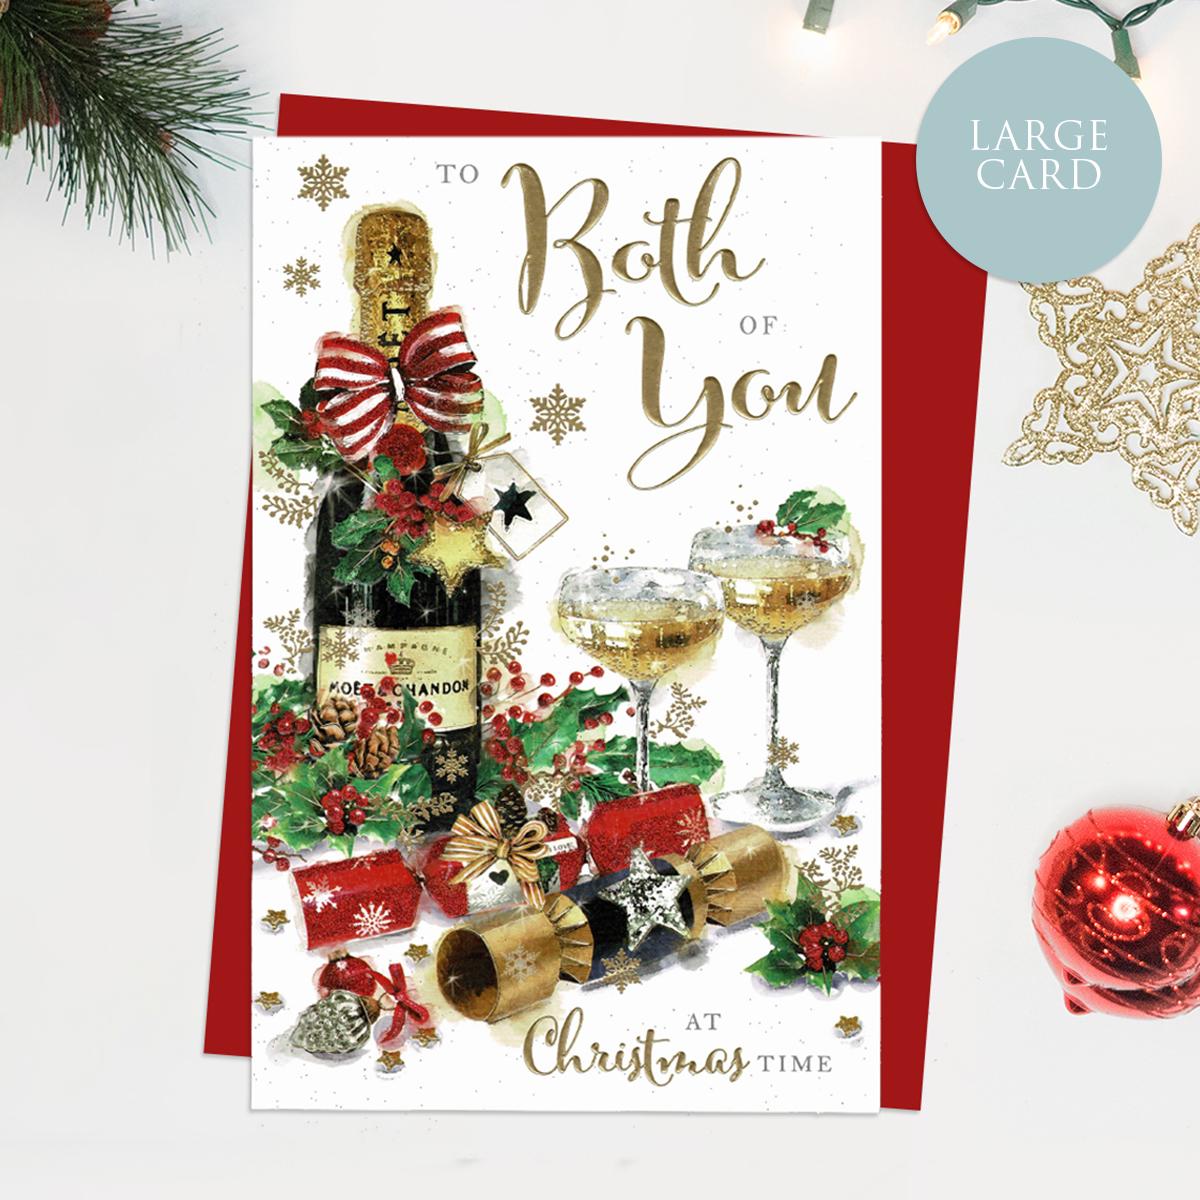 To Both Of You At Christmas Time Featuring A Bottle Of Champagne And Glasses With Christmas Crackers. Finished With Gold Lettering, Red Glitter and Red Envelope